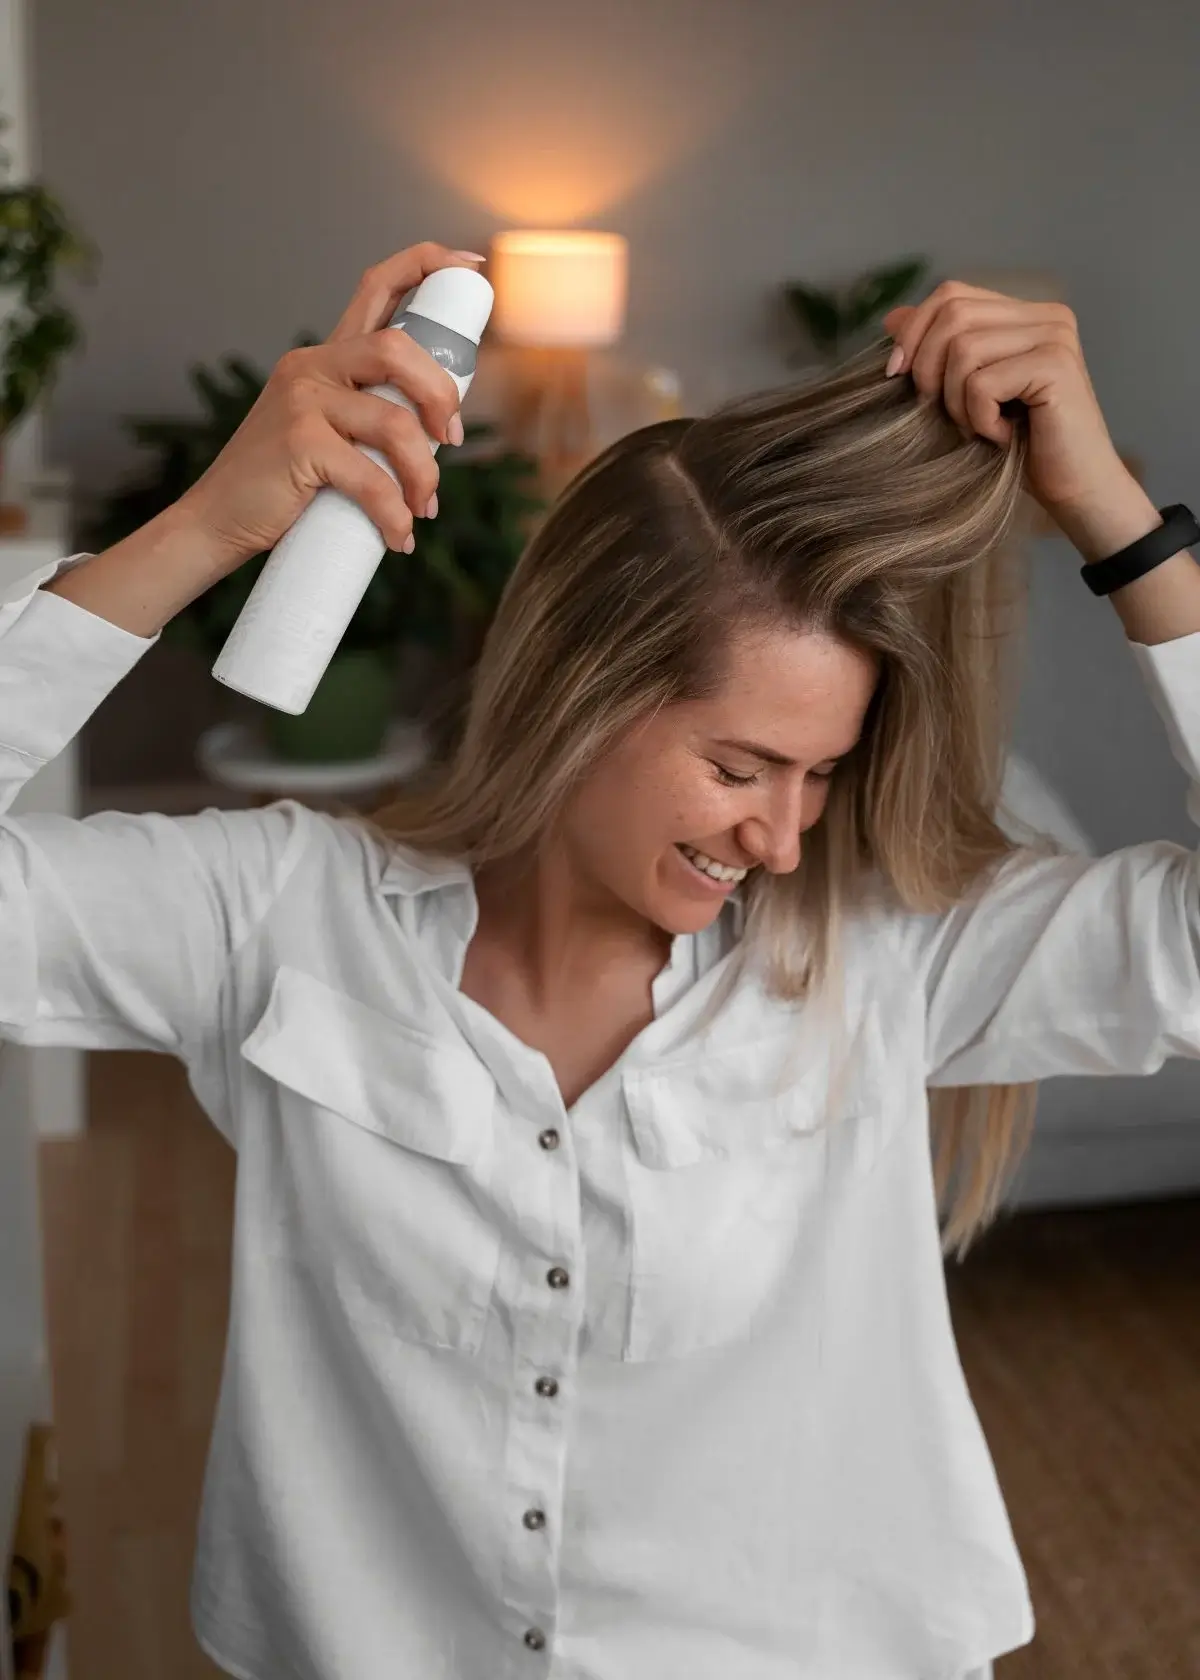 Why choose alcohol-free hair spray over traditional options?